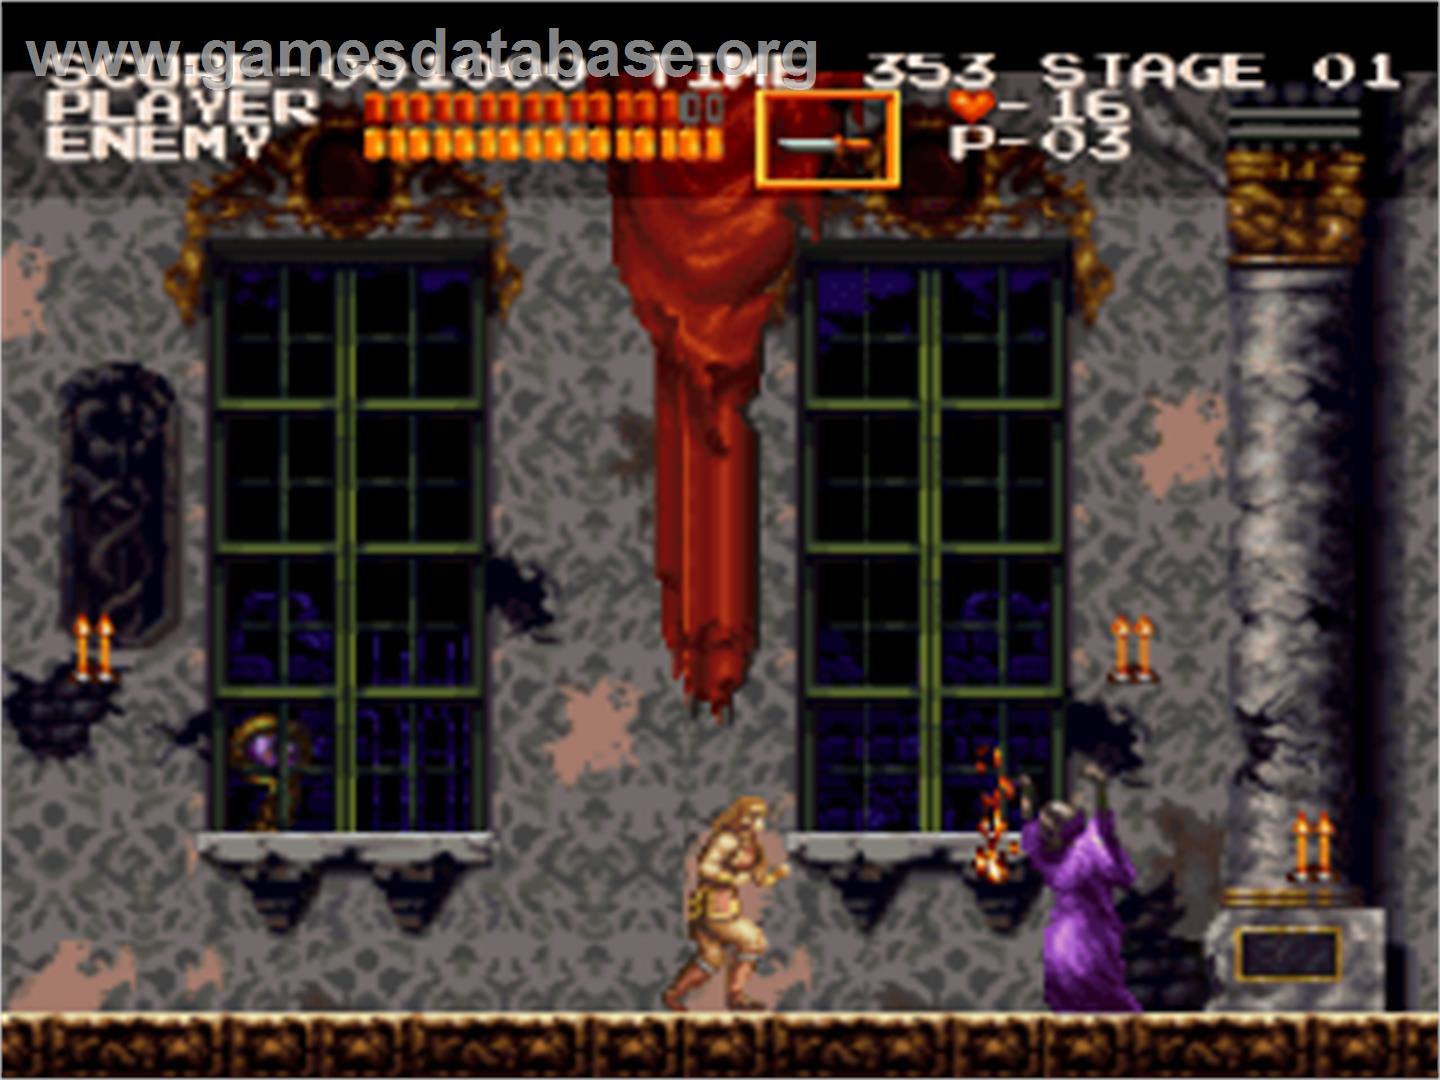 Castlevania Chronicles - Sony Playstation - Artwork - In Game